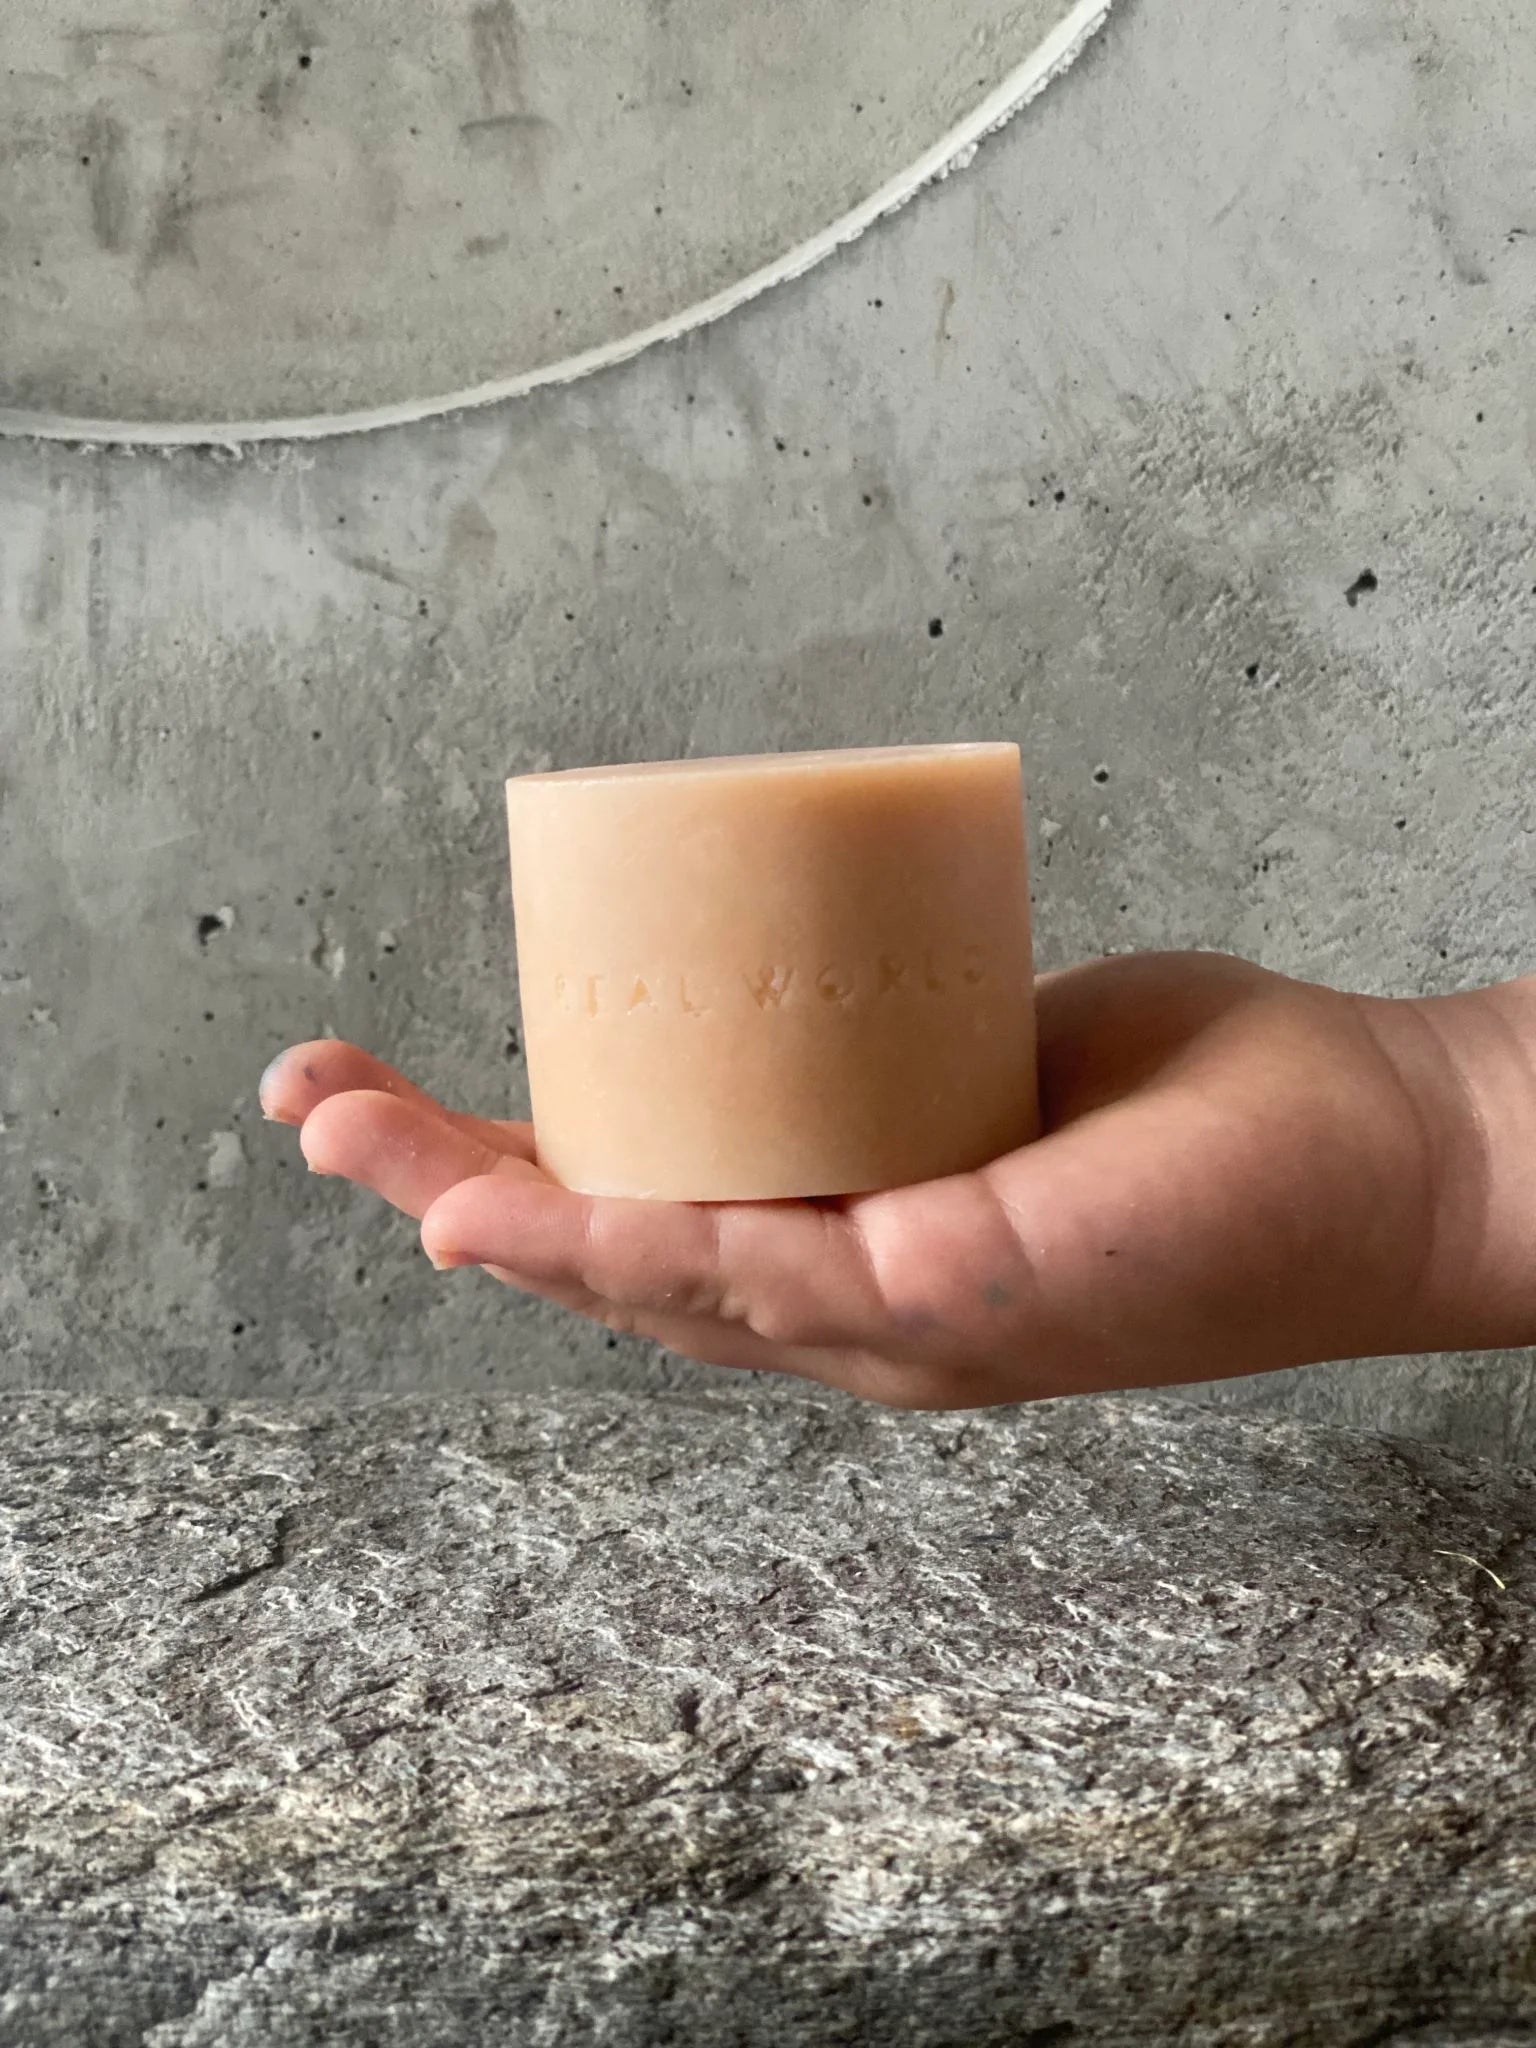 A hand gently holding a Soap Bar - Manuka & Rose Geranium by Real World with the words "Italy Works" embossed on it, against a textured grey concrete background.